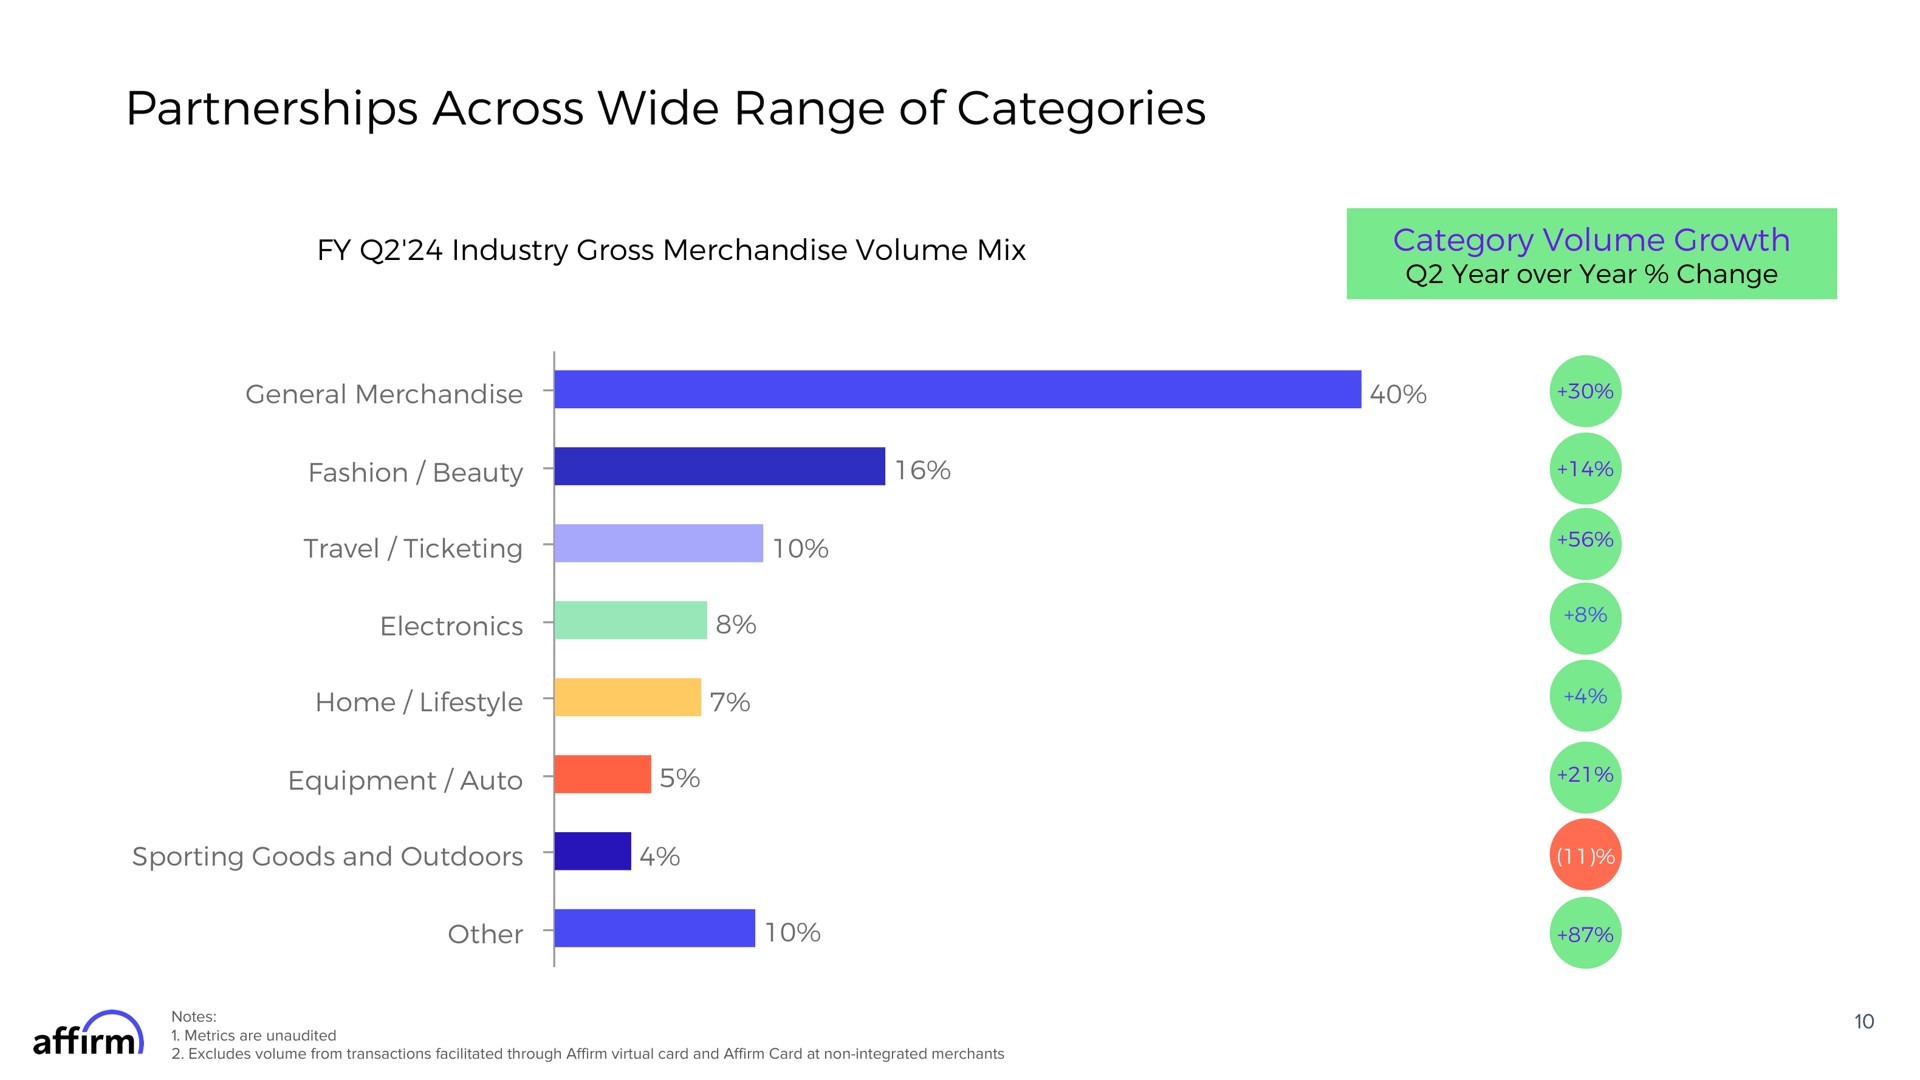 partnerships across wide range of categories industry gross merchandise volume mix category volume growth i say a | Affirm